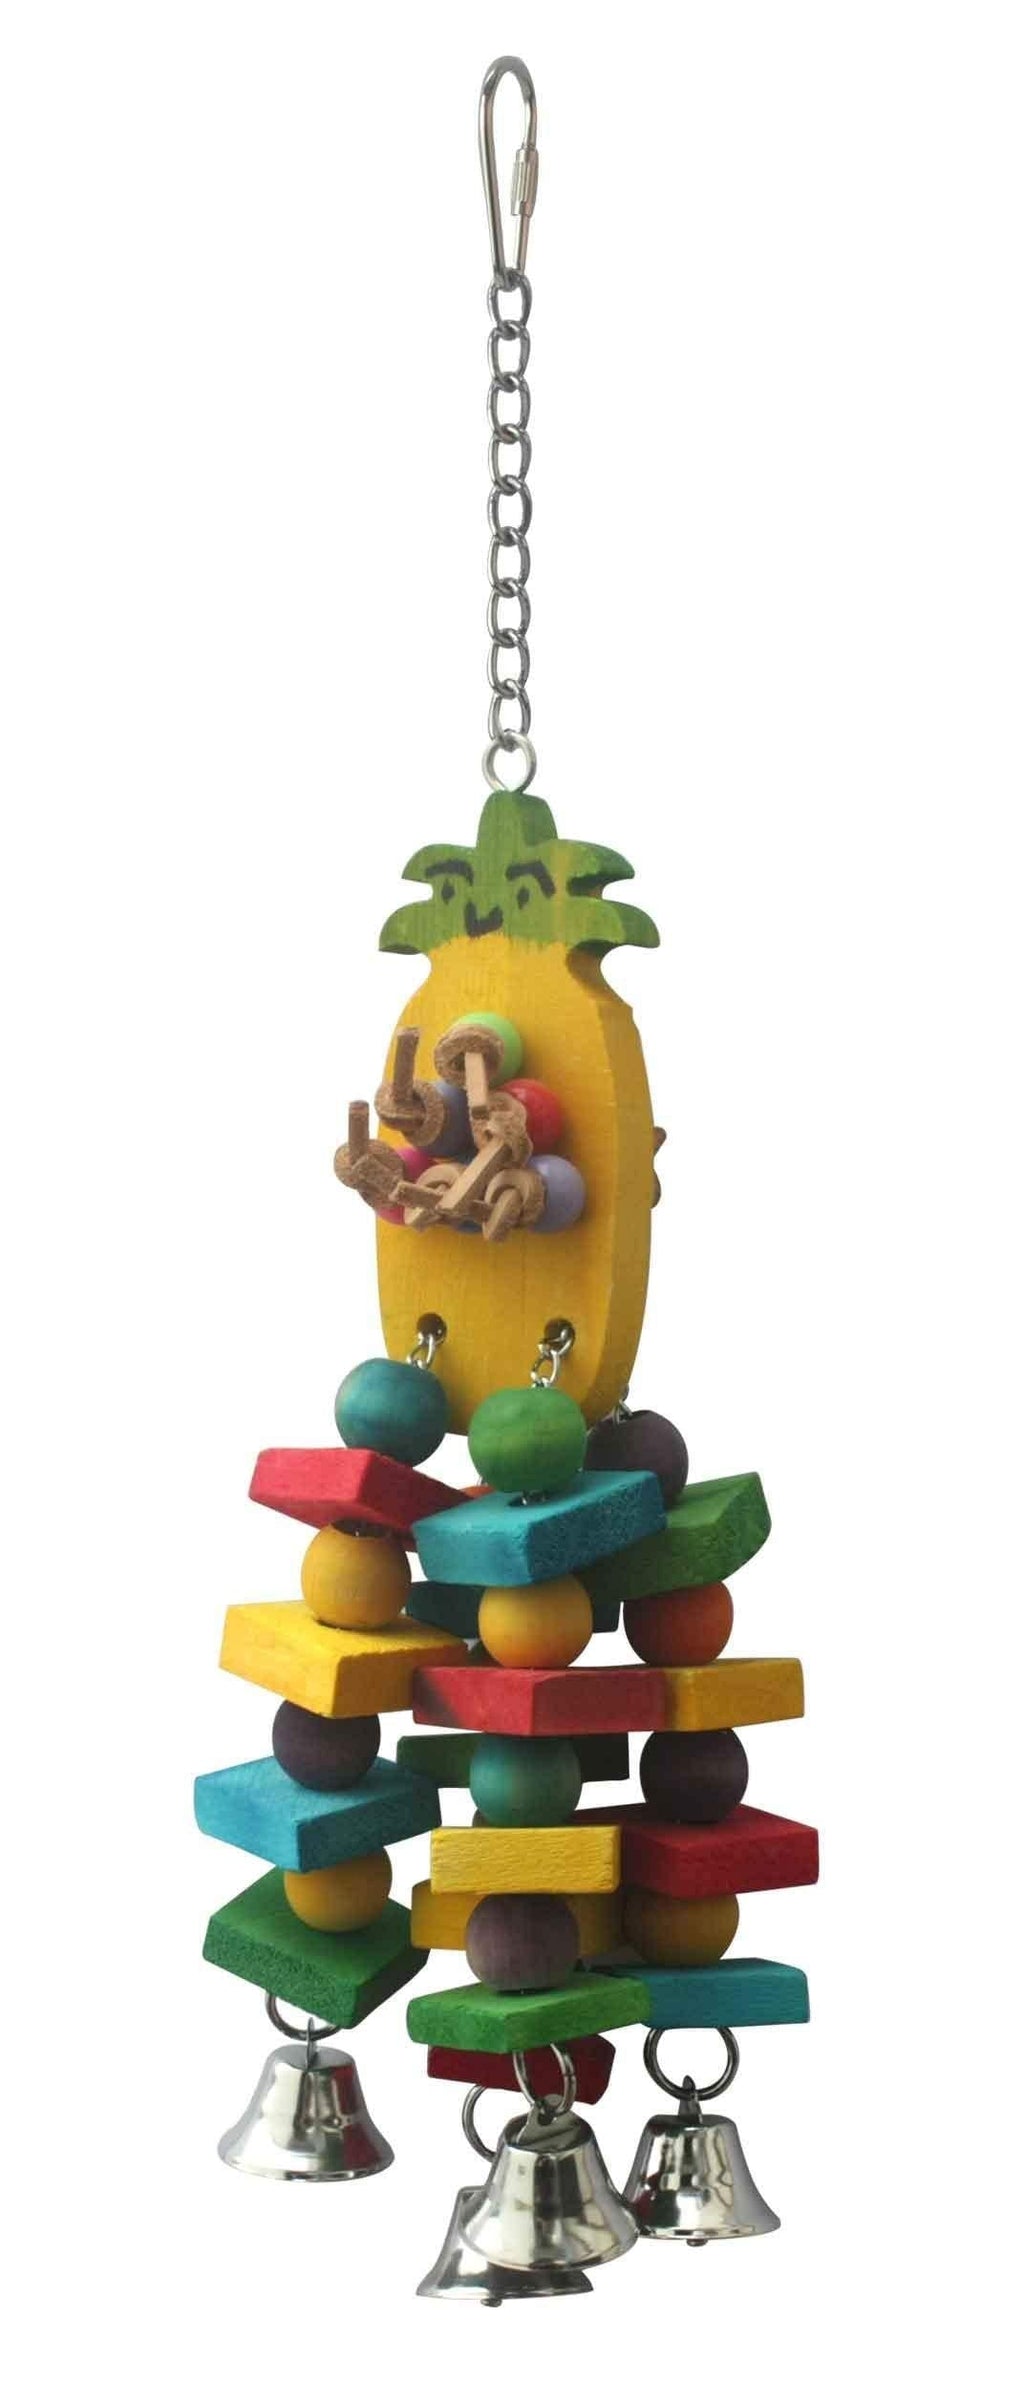 [Australia] - Birds LOVE Medium or Small Wood Pineapple w Leather Strings and Wood Pieces Bird Toy, Conures African Grey Caiques Quakers Mini Cockatoo Parakeets - Choose Your Size 8x6x2 - Small 